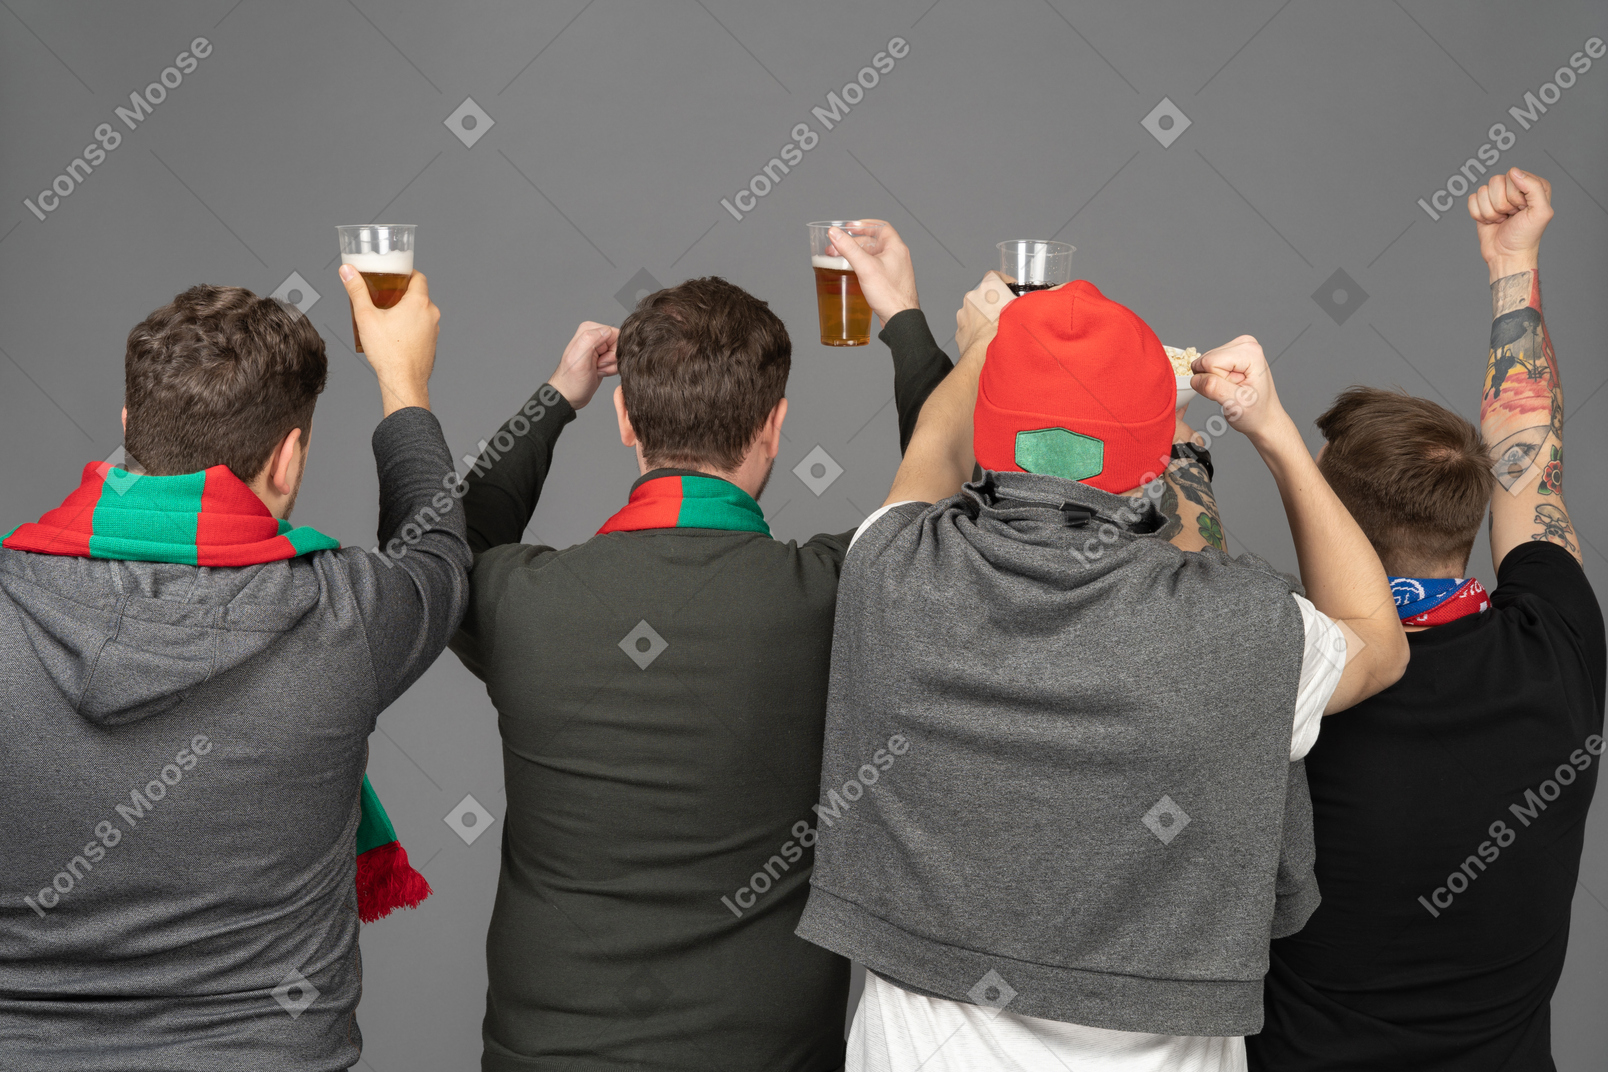 Back view of four male football fans celebrating the victory & holding beer